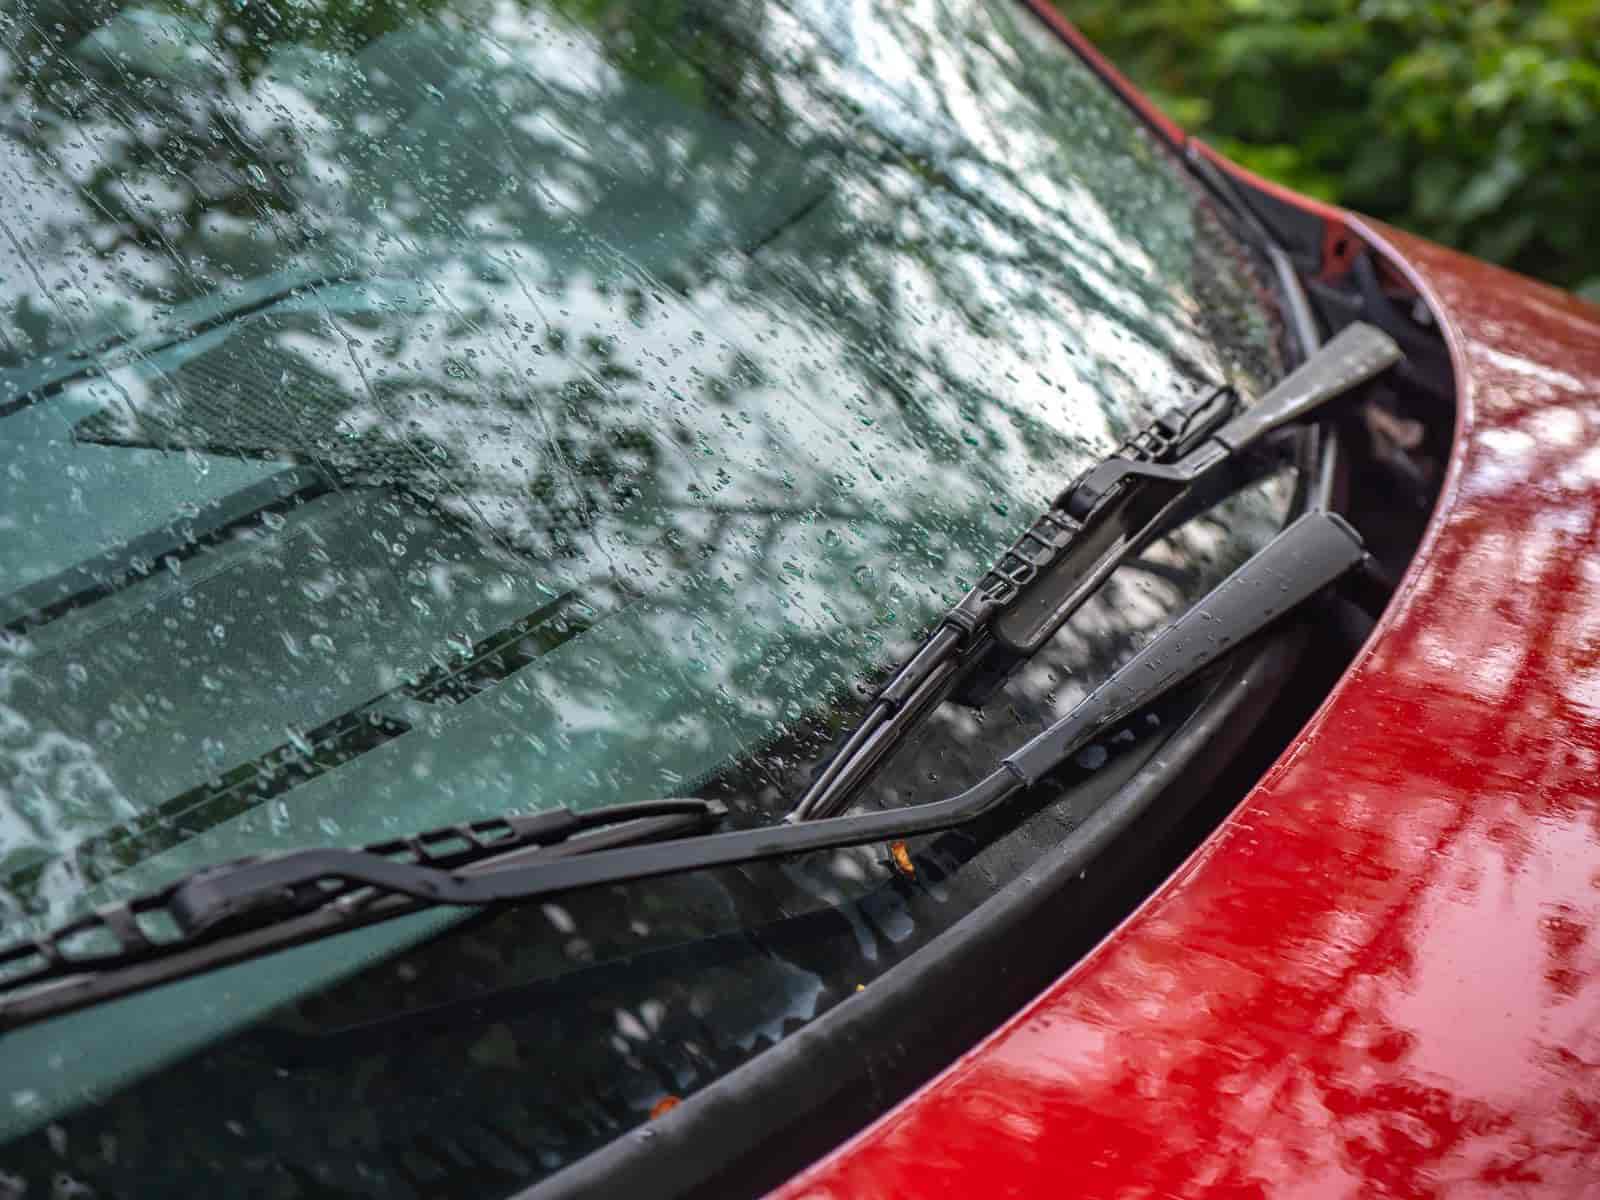 How Long Do Windshield Wipers Last?